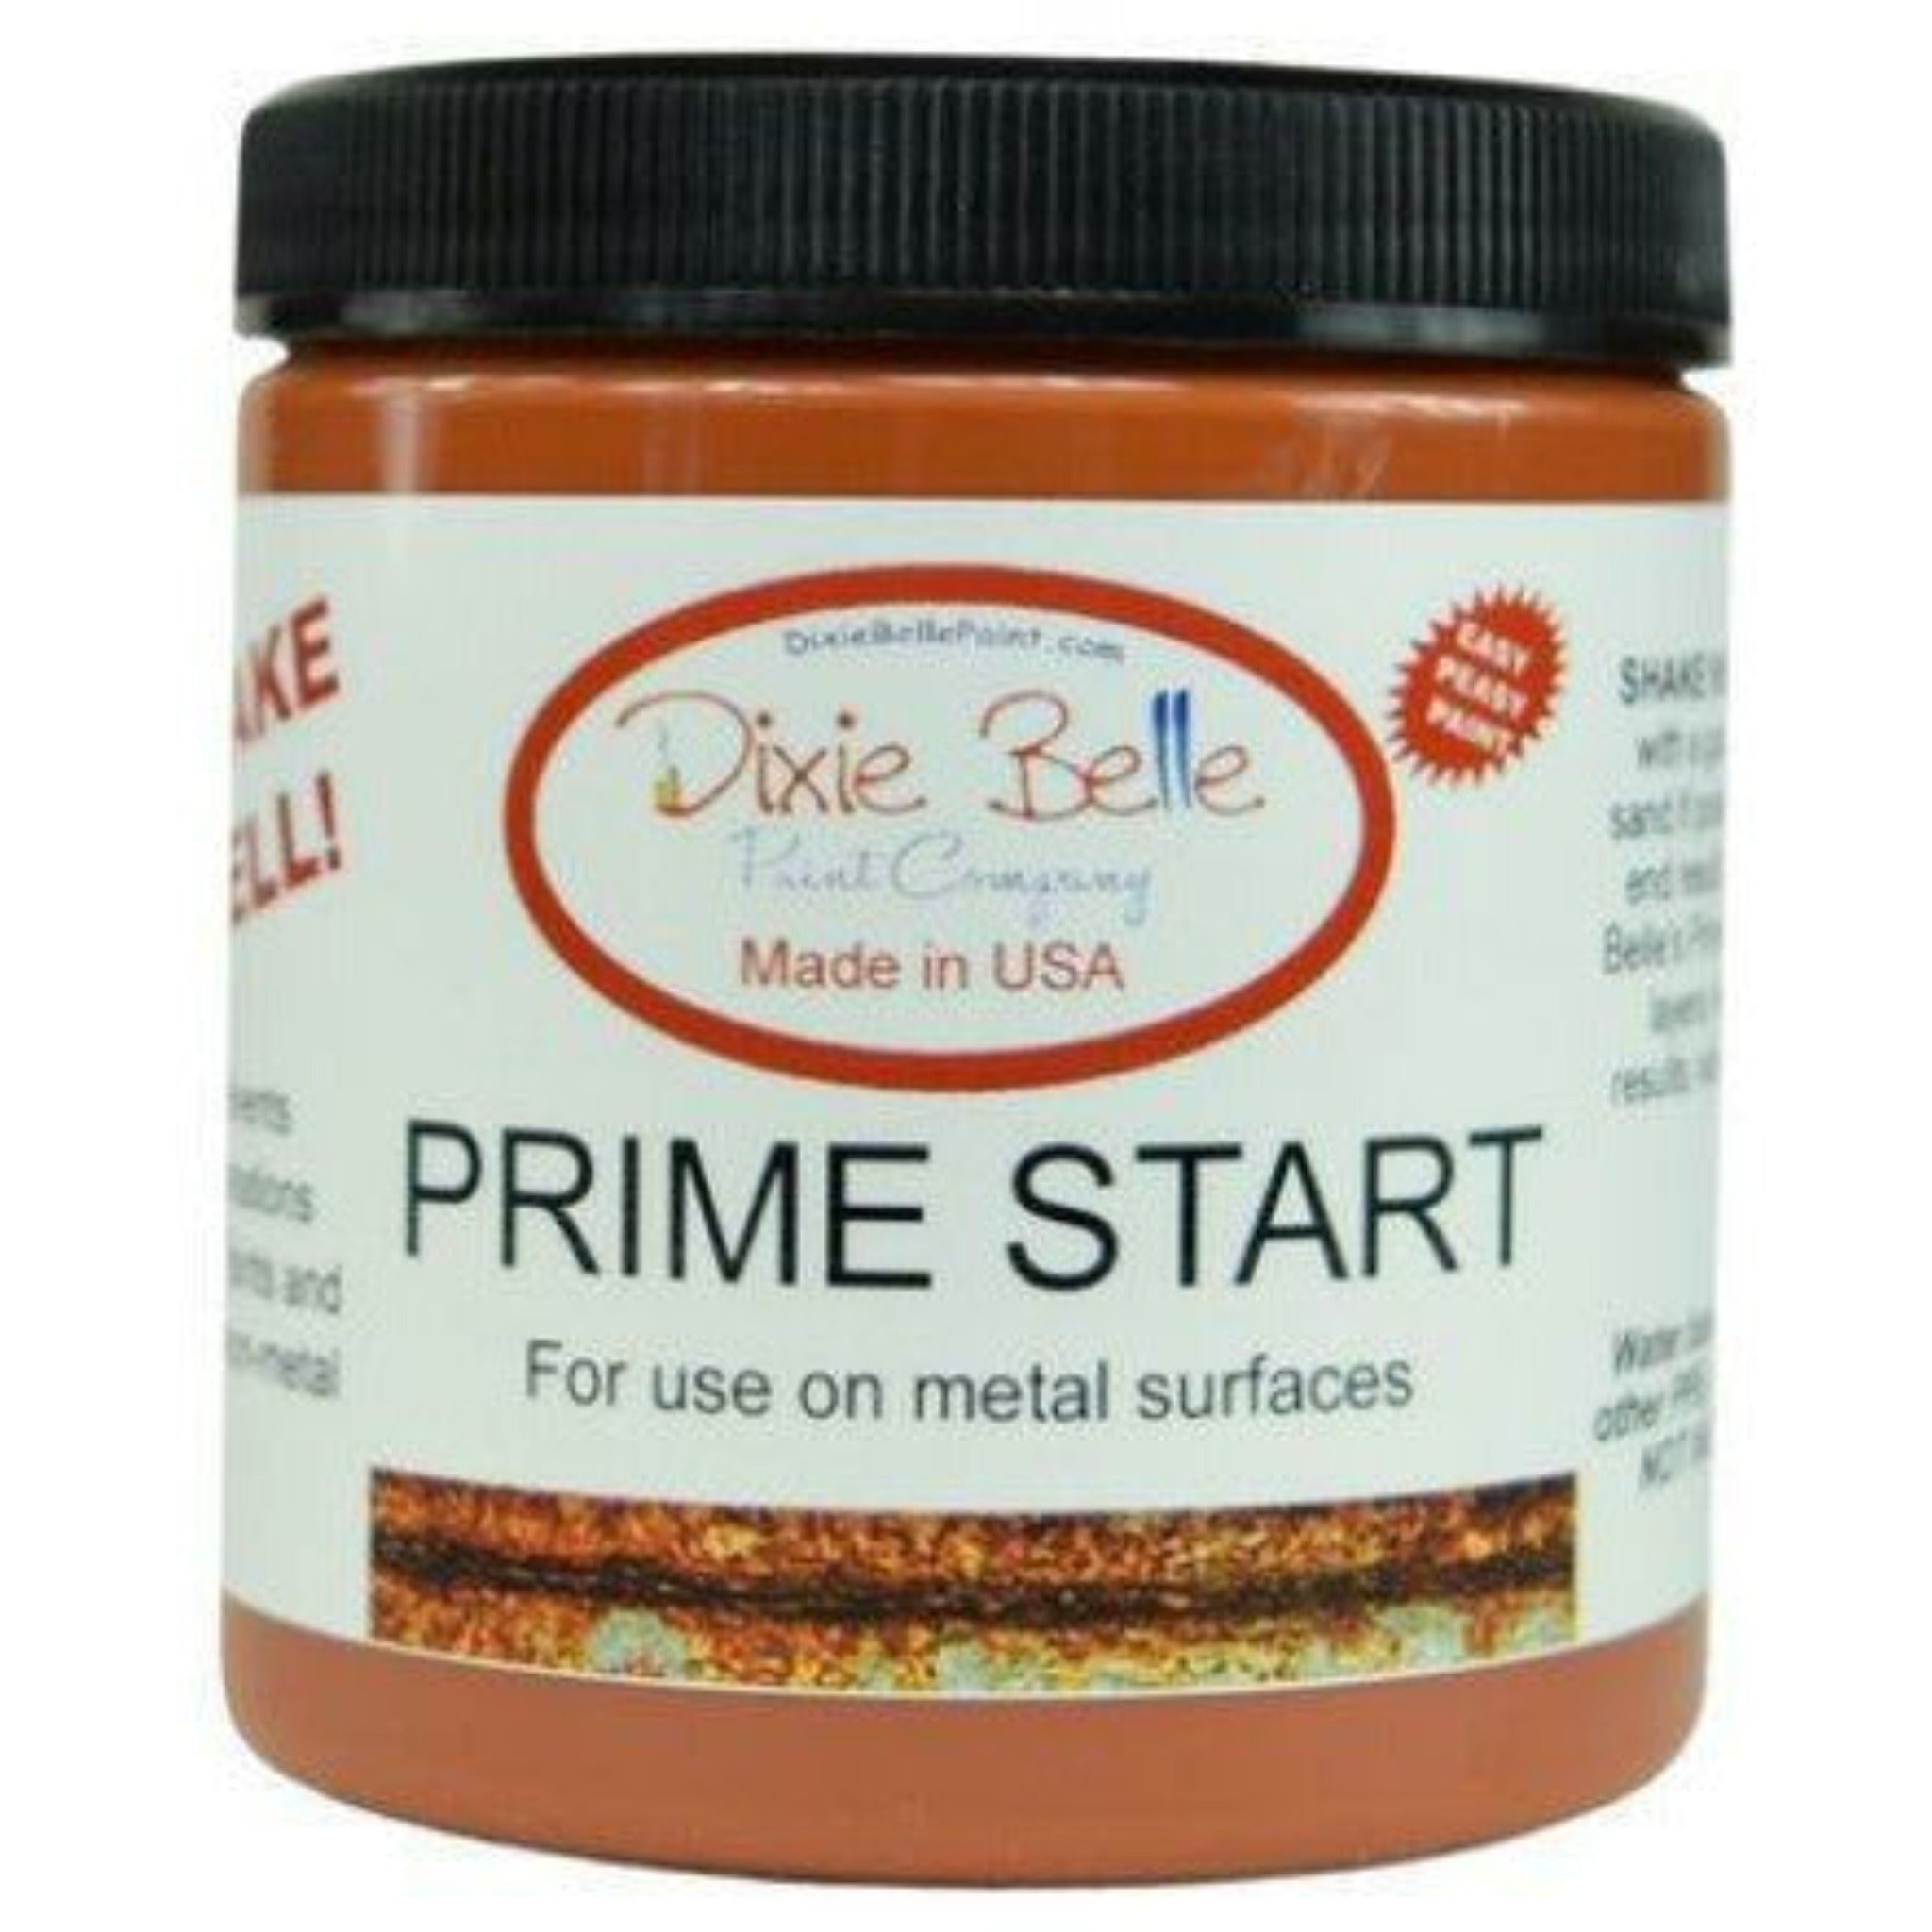 An 8oz container of Dixie Belle Paint Comapany's Prime Start is against a white background. This product is a protectantwhen using Patima products over metal.